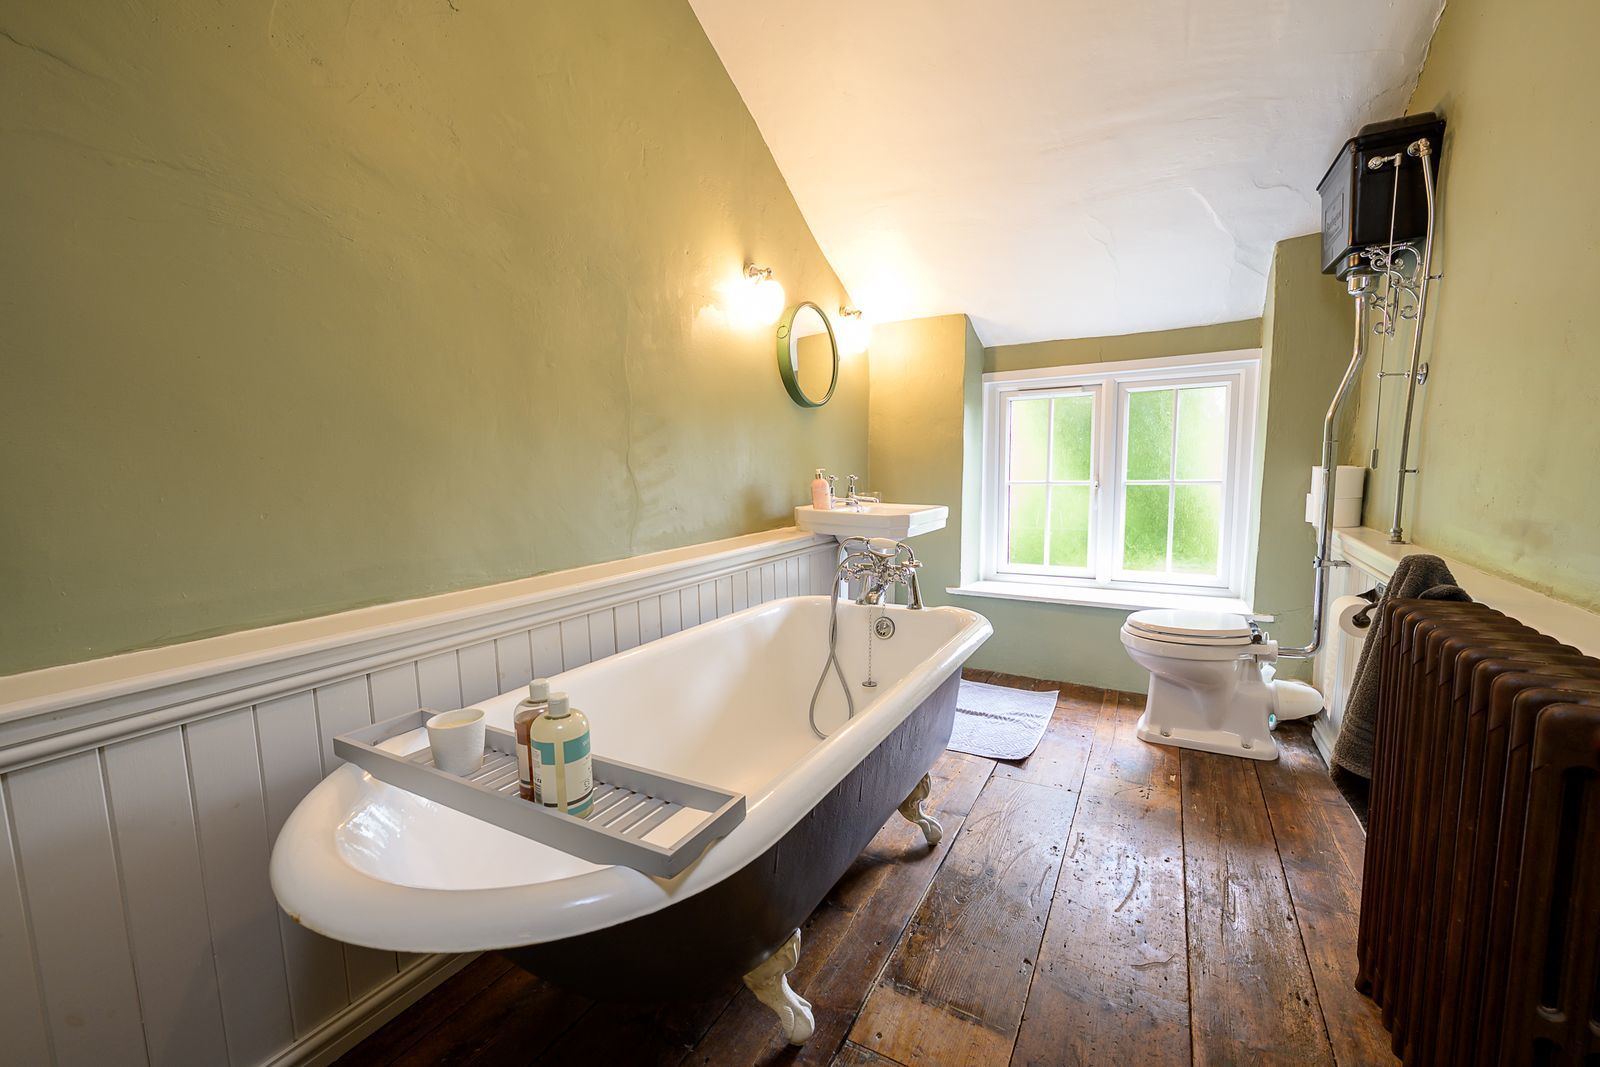 The family bathroom can be found on the first floor. Picture: Hamilton Stiller Estate Agents/Zoopla